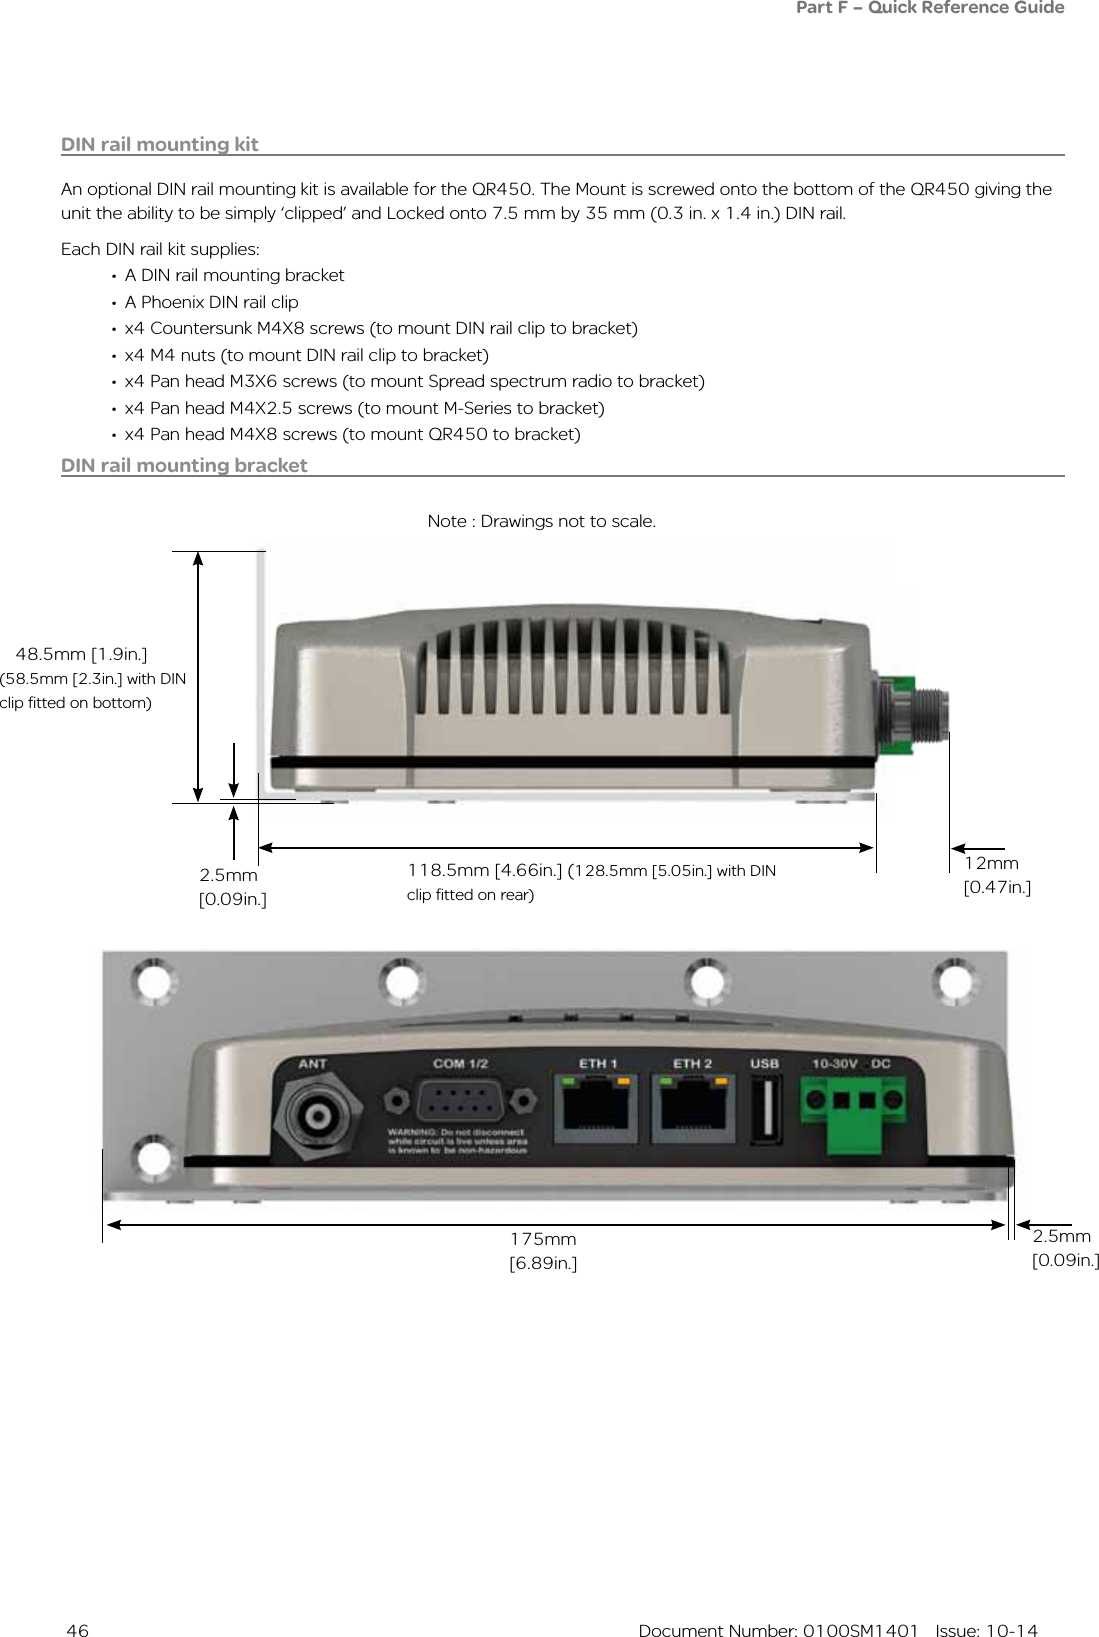  46  Document Number: 0100SM1401   Issue: 10-14DIN rail mounting kitAn optional DIN rail mounting kit is available for the QR450. The Mount is screwed onto the bottom of the QR450 giving the unit the ability to be simply ‘clipped’ and Locked onto 7.5 mm by 35 mm (0.3 in. x 1.4 in.) DIN rail.Each DIN rail kit supplies:• A DIN rail mounting bracket• A Phoenix DIN rail clip• x4 Countersunk M4X8 screws (to mount DIN rail clip to bracket)• x4 M4 nuts (to mount DIN rail clip to bracket)• x4 Pan head M3X6 screws (to mount Spread spectrum radio to bracket)• x4 Pan head M4X2.5 screws (to mount M-Series to bracket)• x4 Pan head M4X8 screws (to mount QR450 to bracket)Note : Drawings not to scale.118.5mm [4.66in.] (128.5mm [5.05in.] with DIN clip fitted on rear)12mm [0.47in.]2.5mm [0.09in.]48.5mm [1.9in.]175mm [6.89in.]DIN rail mounting bracket(58.5mm [2.3in.] with DIN clip fitted on bottom)Part F – Quick Reference Guide 2.5mm [0.09in.]